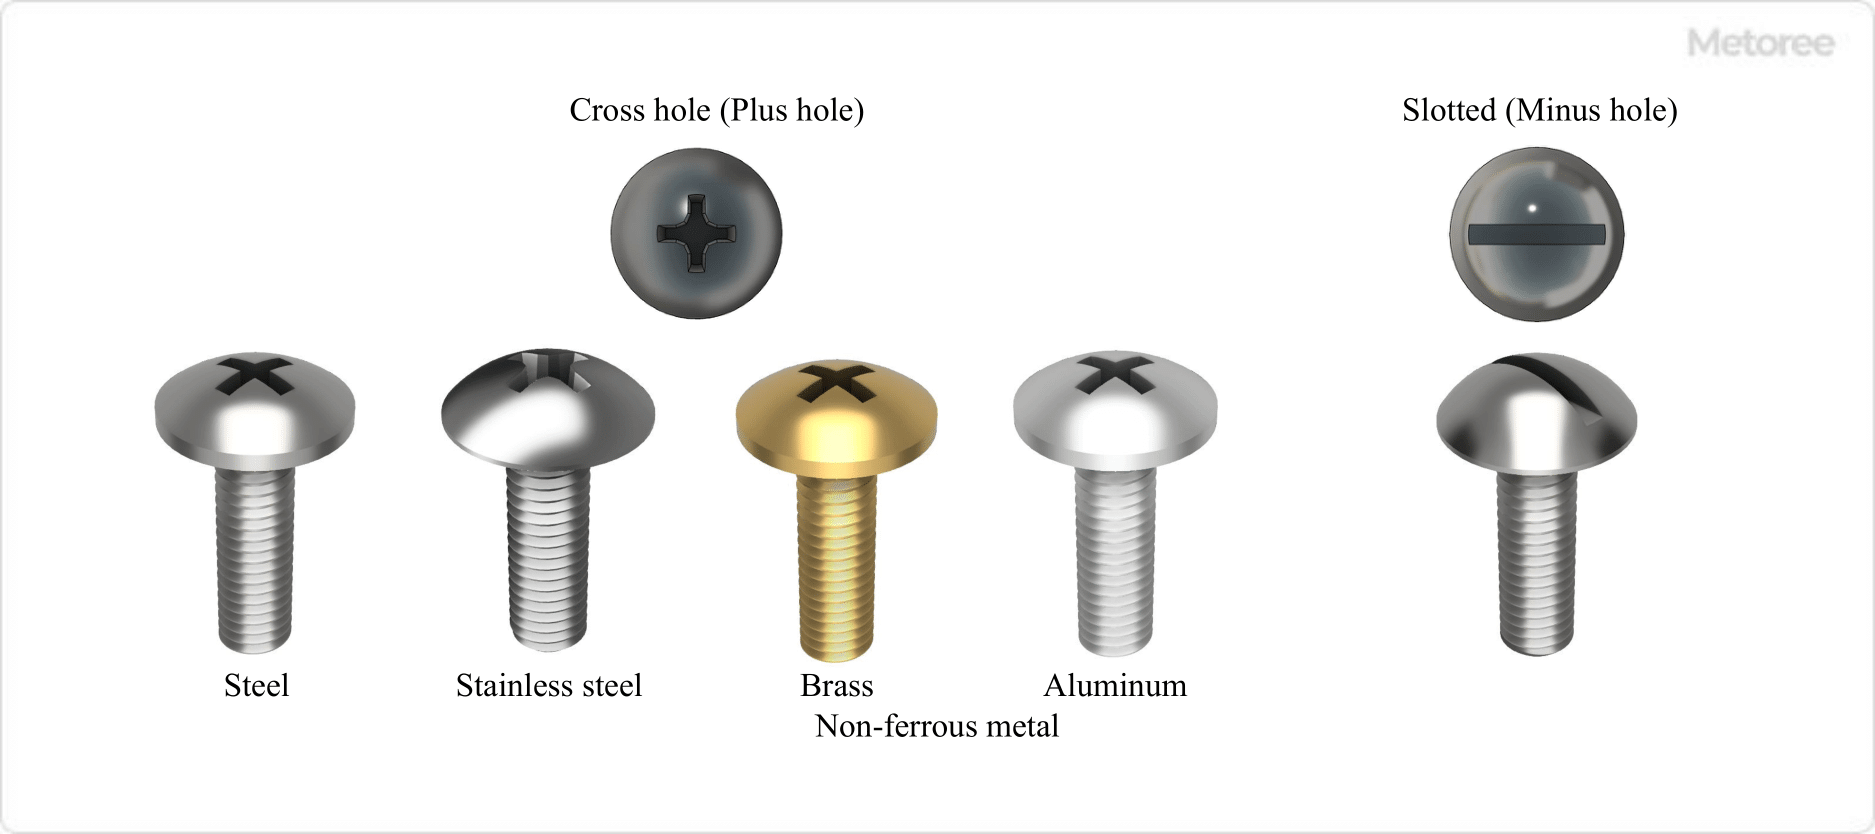 Figure 3. Types, Materials, and Shapes of Truss Head Screws